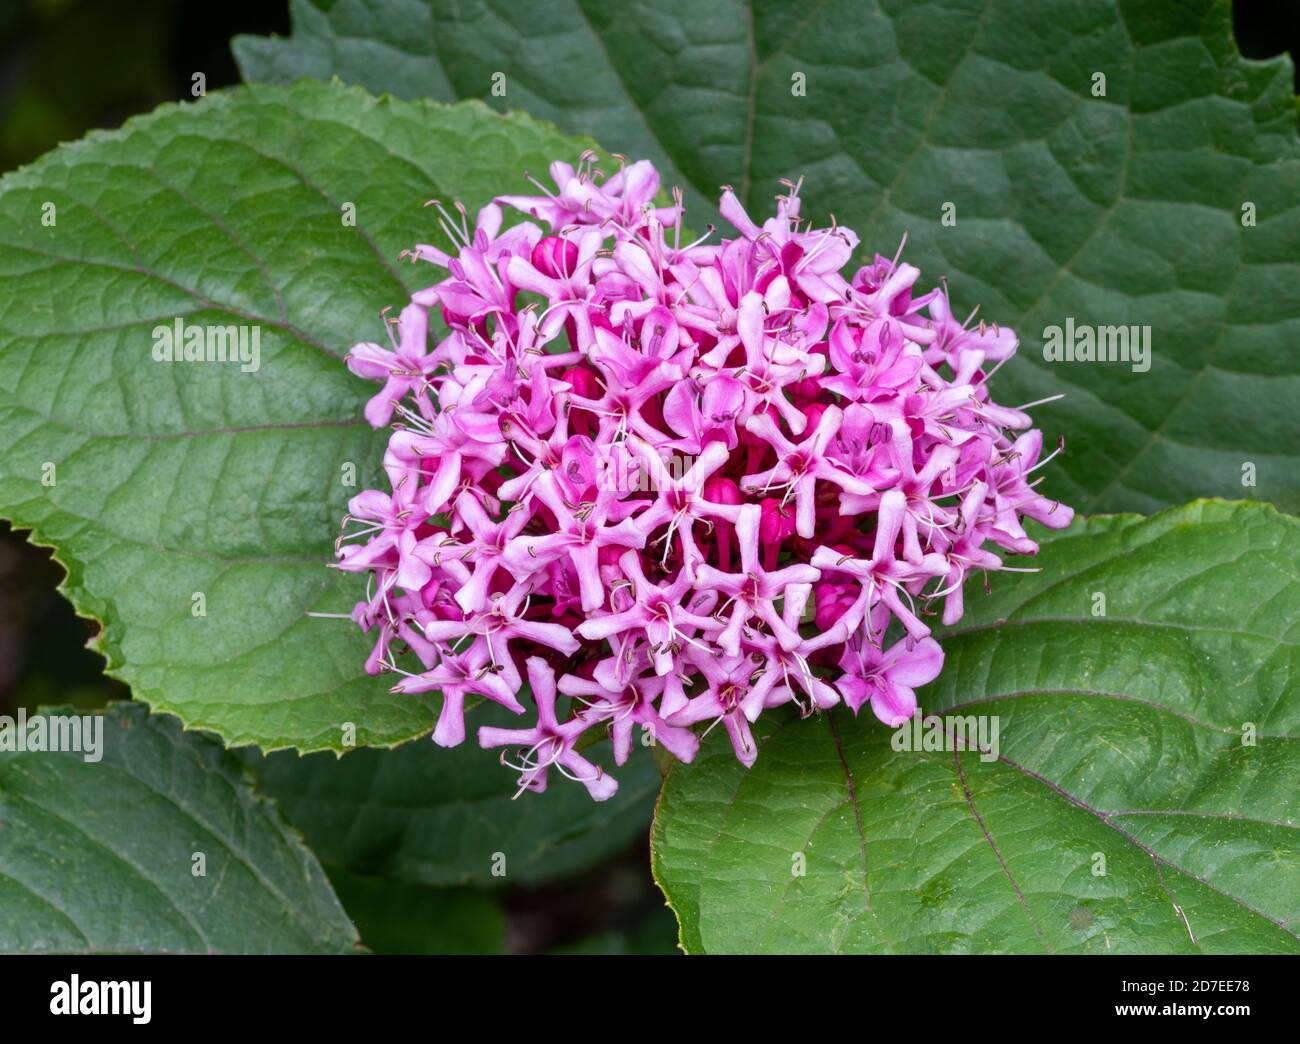 Close up of pink flowers of Glory Flower, Clerodendrum bungei, against large thick green leaves. Stock Photo